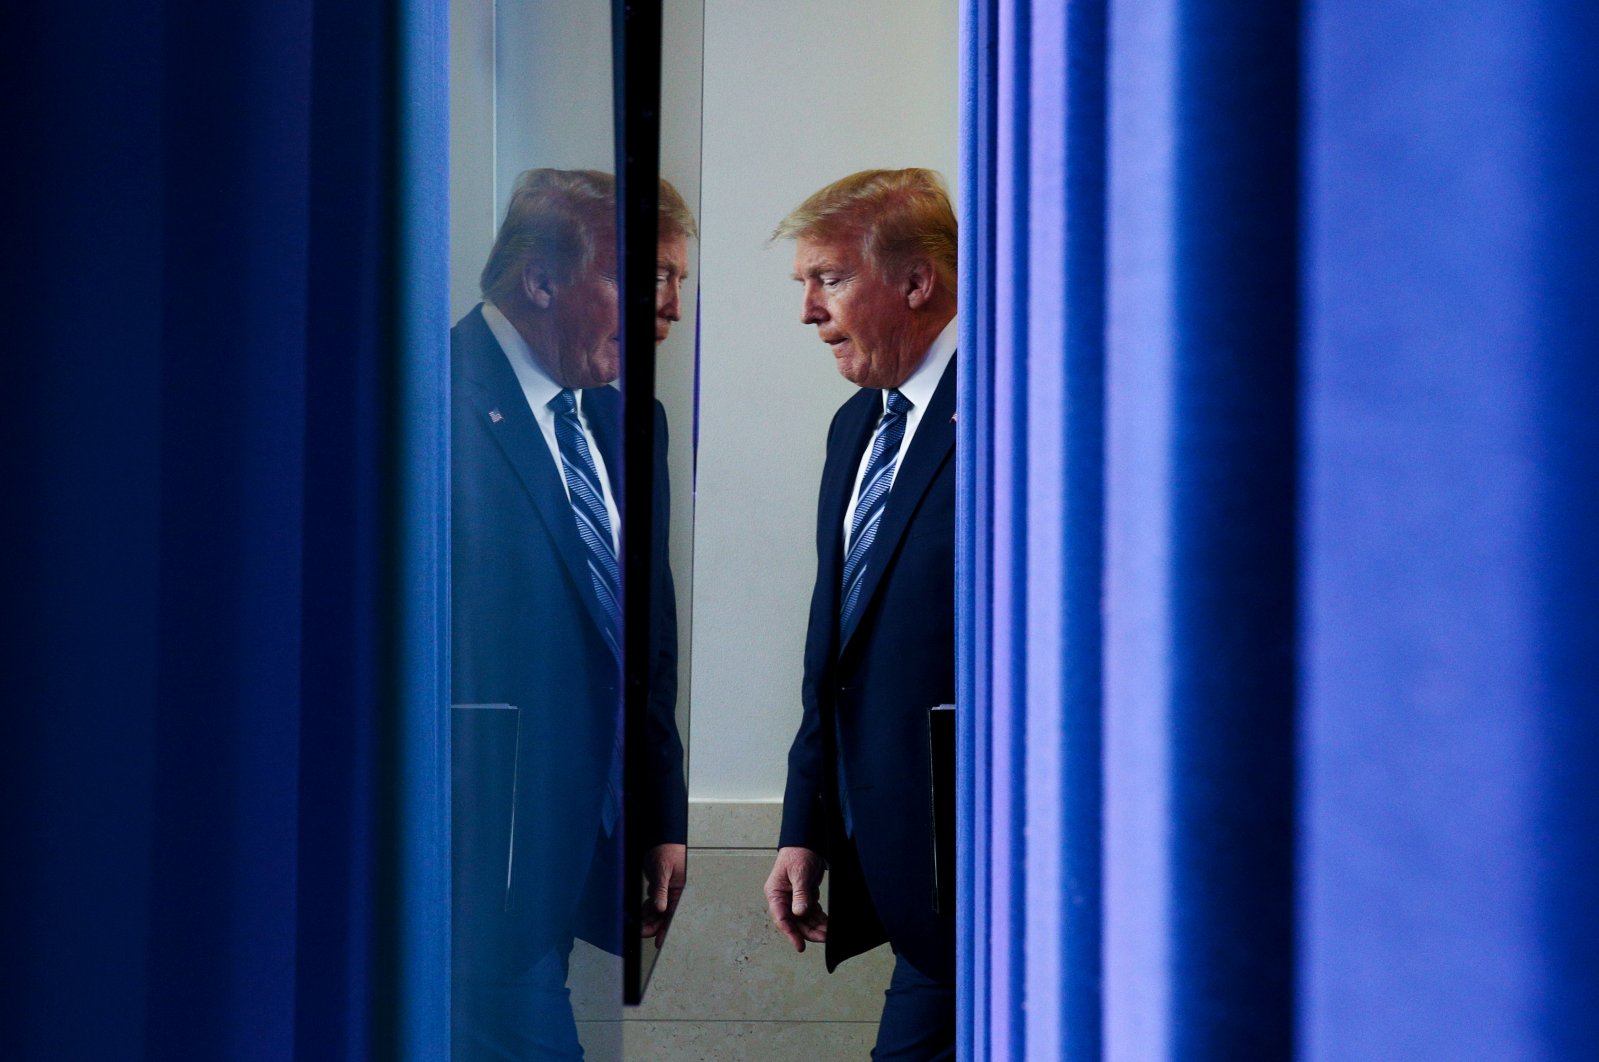 U.S. President Donald Trump arrives to lead the daily coronavirus task force briefing as seen from behind the backdrop of the Brady press briefing room at the White House in Washington, U.S., April 21, 2020. (Reuters Photo)